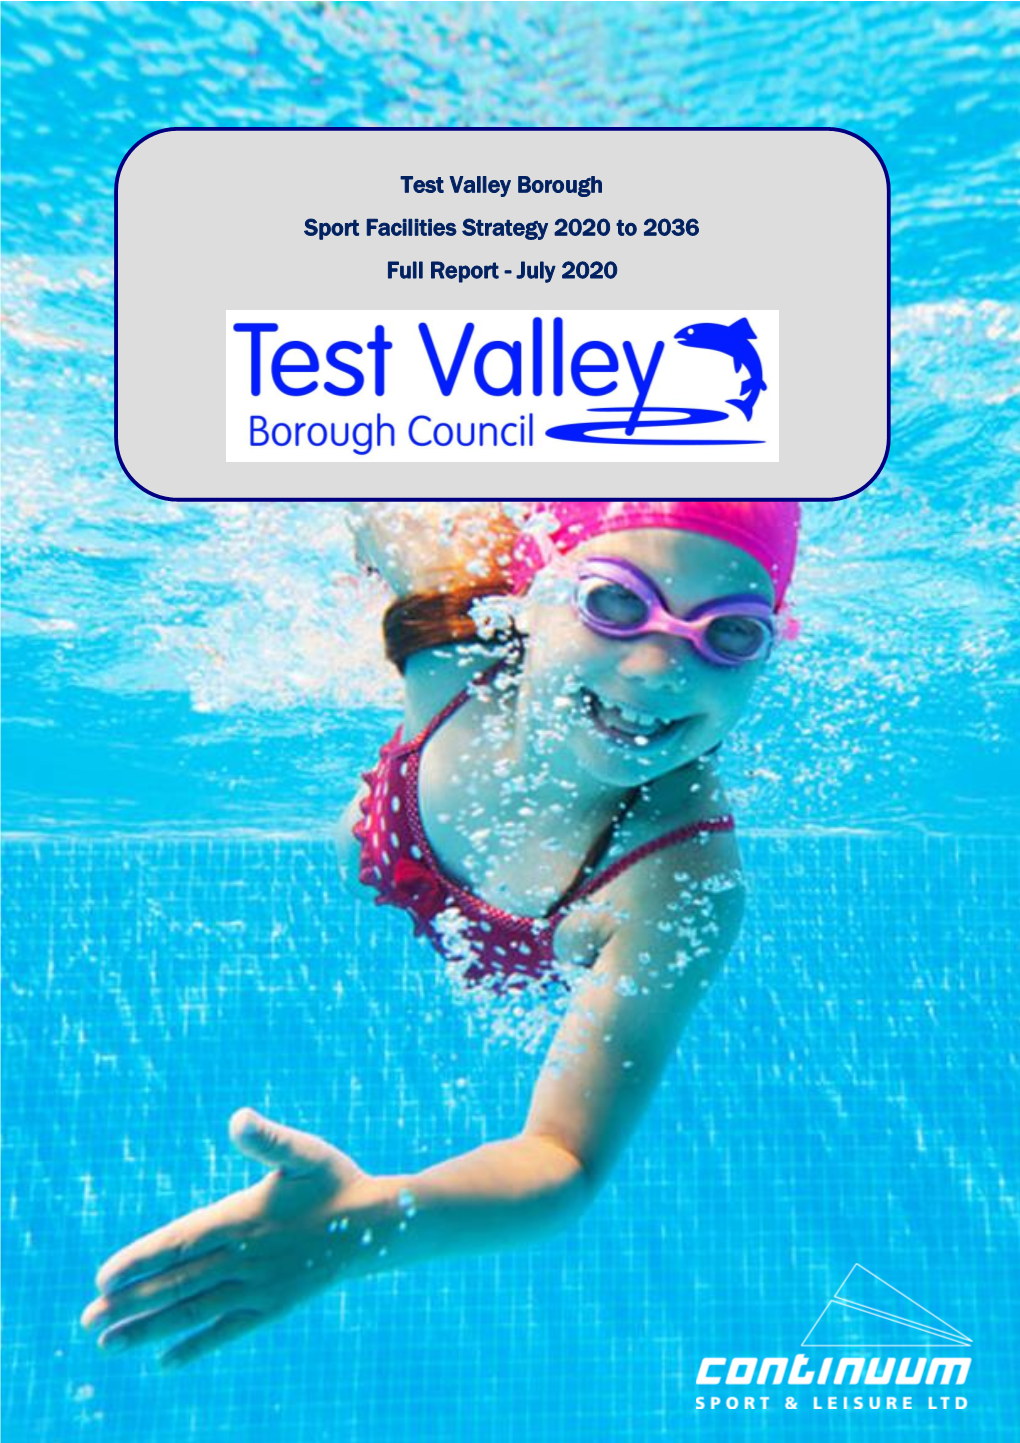 Test Valley Borough Sport Facilities Strategy 2020 to 2036 Full Report